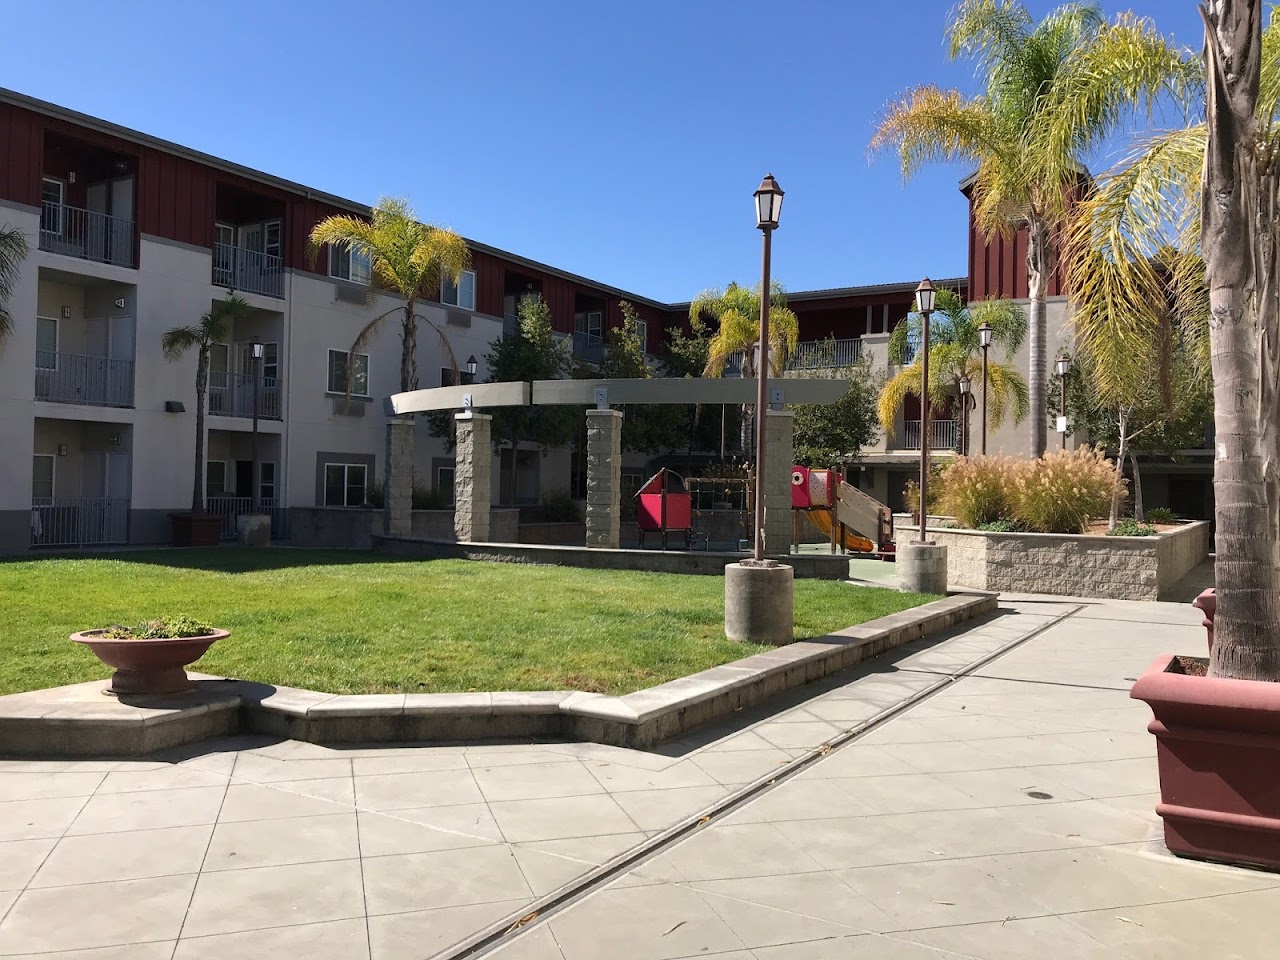 Photo of ALMADEN FAMILY APTS. Affordable housing located at 1501 ALMADEN EXPY SAN JOSE, CA 95125